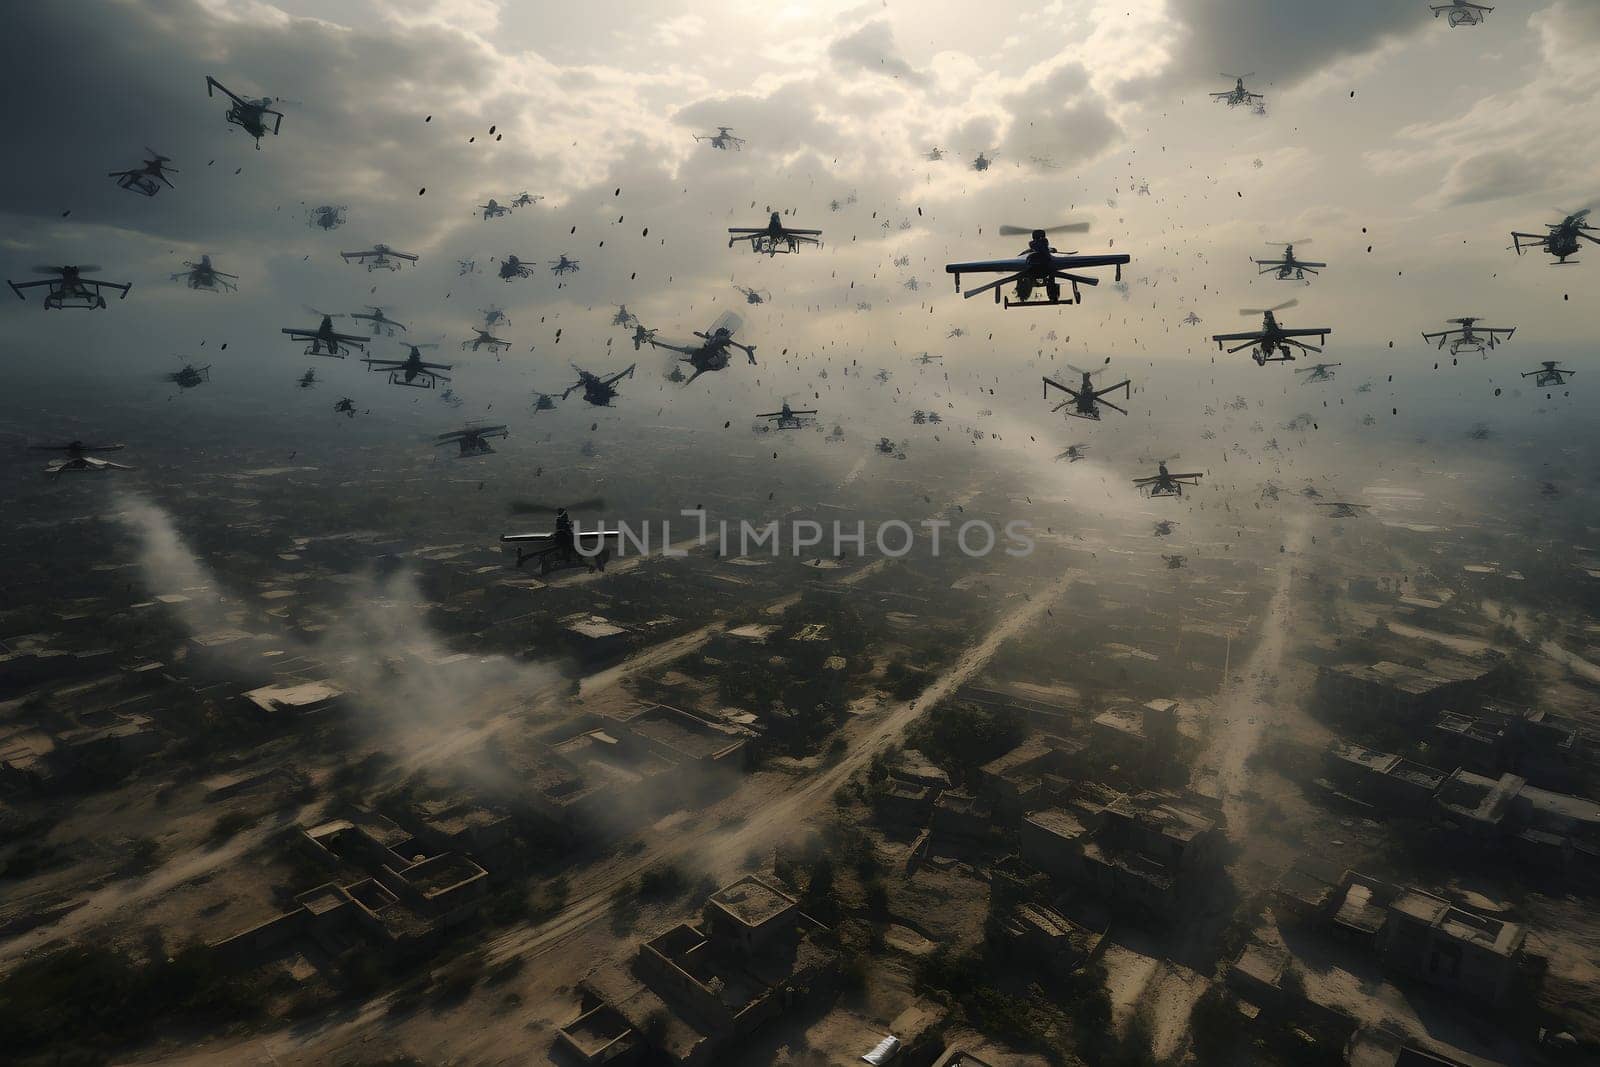 drone war - many military copter drones above middle-eastern city battlefield at daytime, neural network generated image by z1b